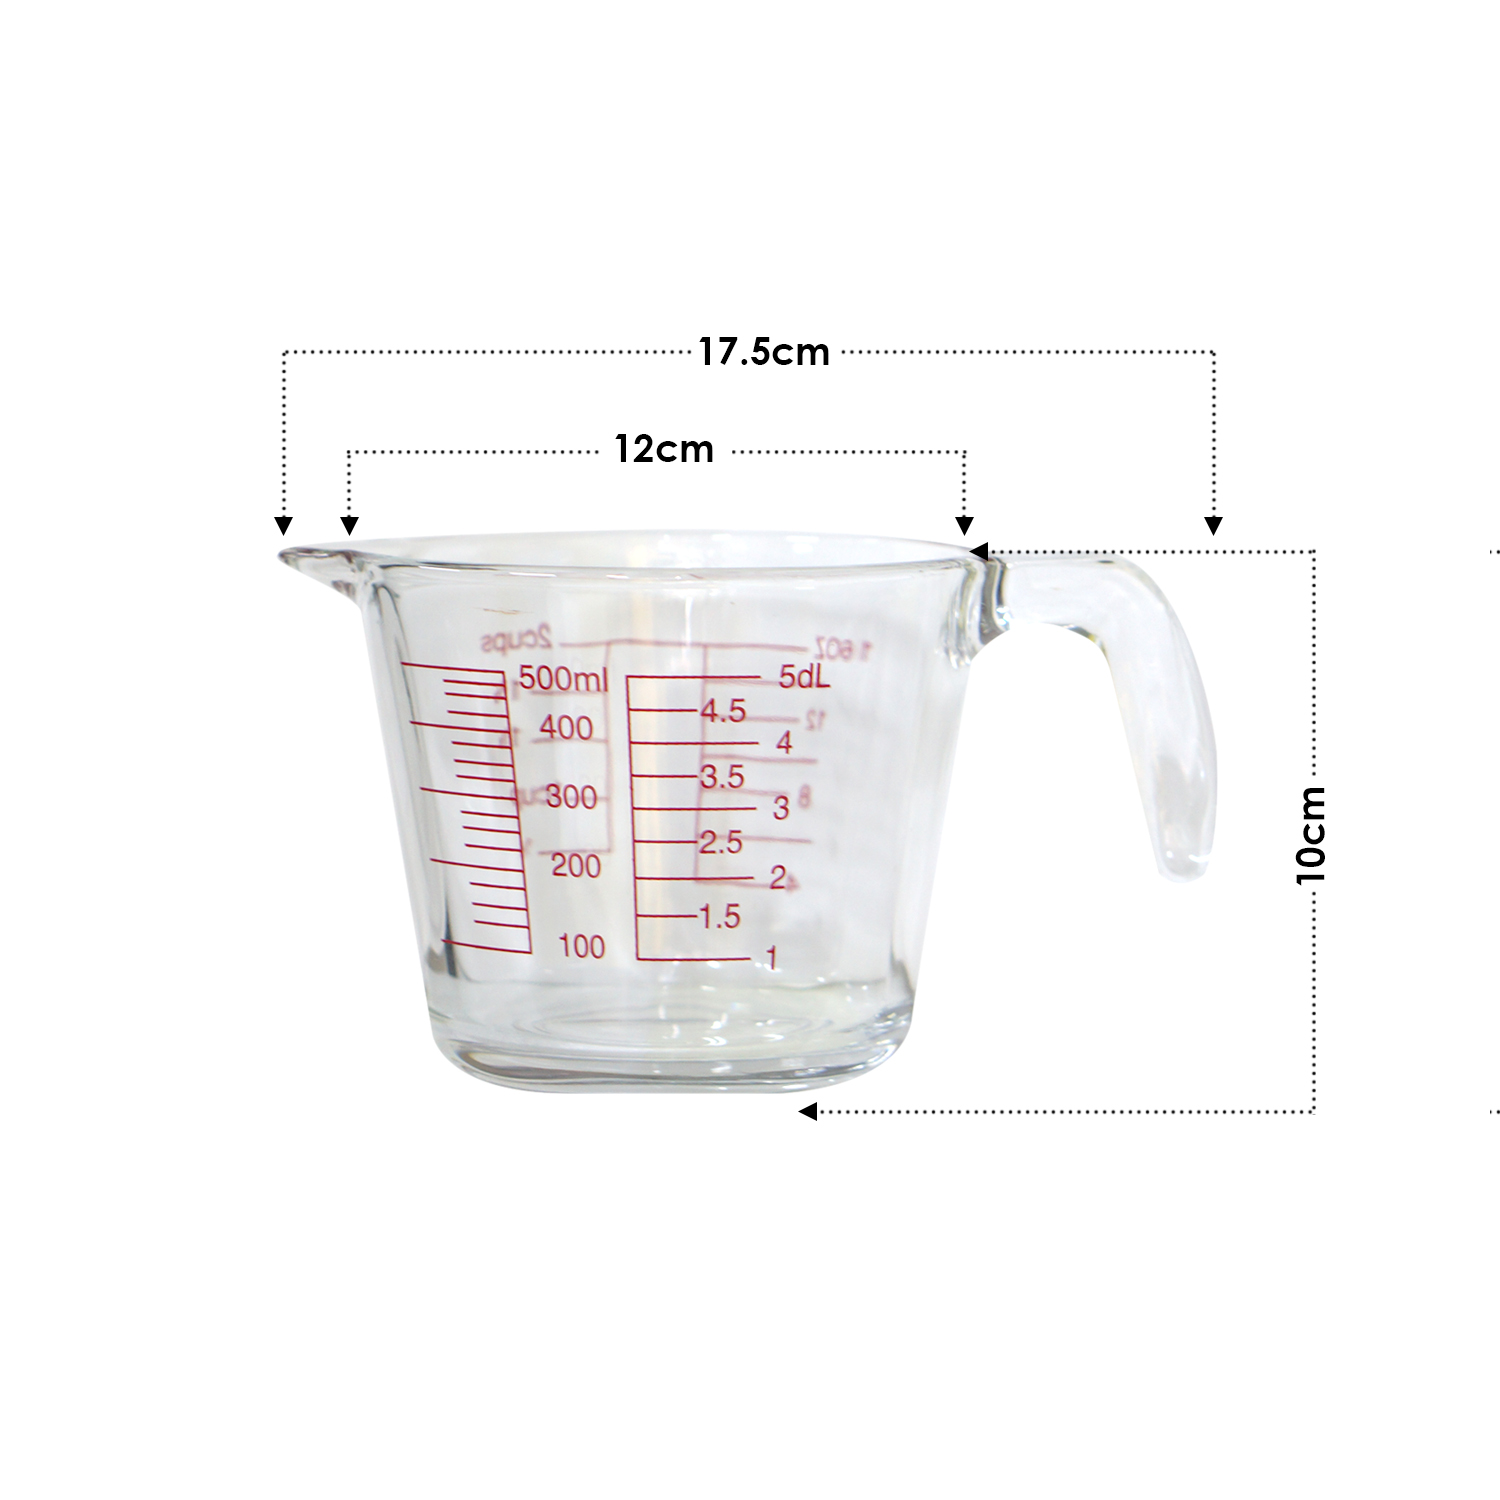 Aiwanto 500ml Measuring Jug Measuring Cup for Cooking Glass Jug for Measuring